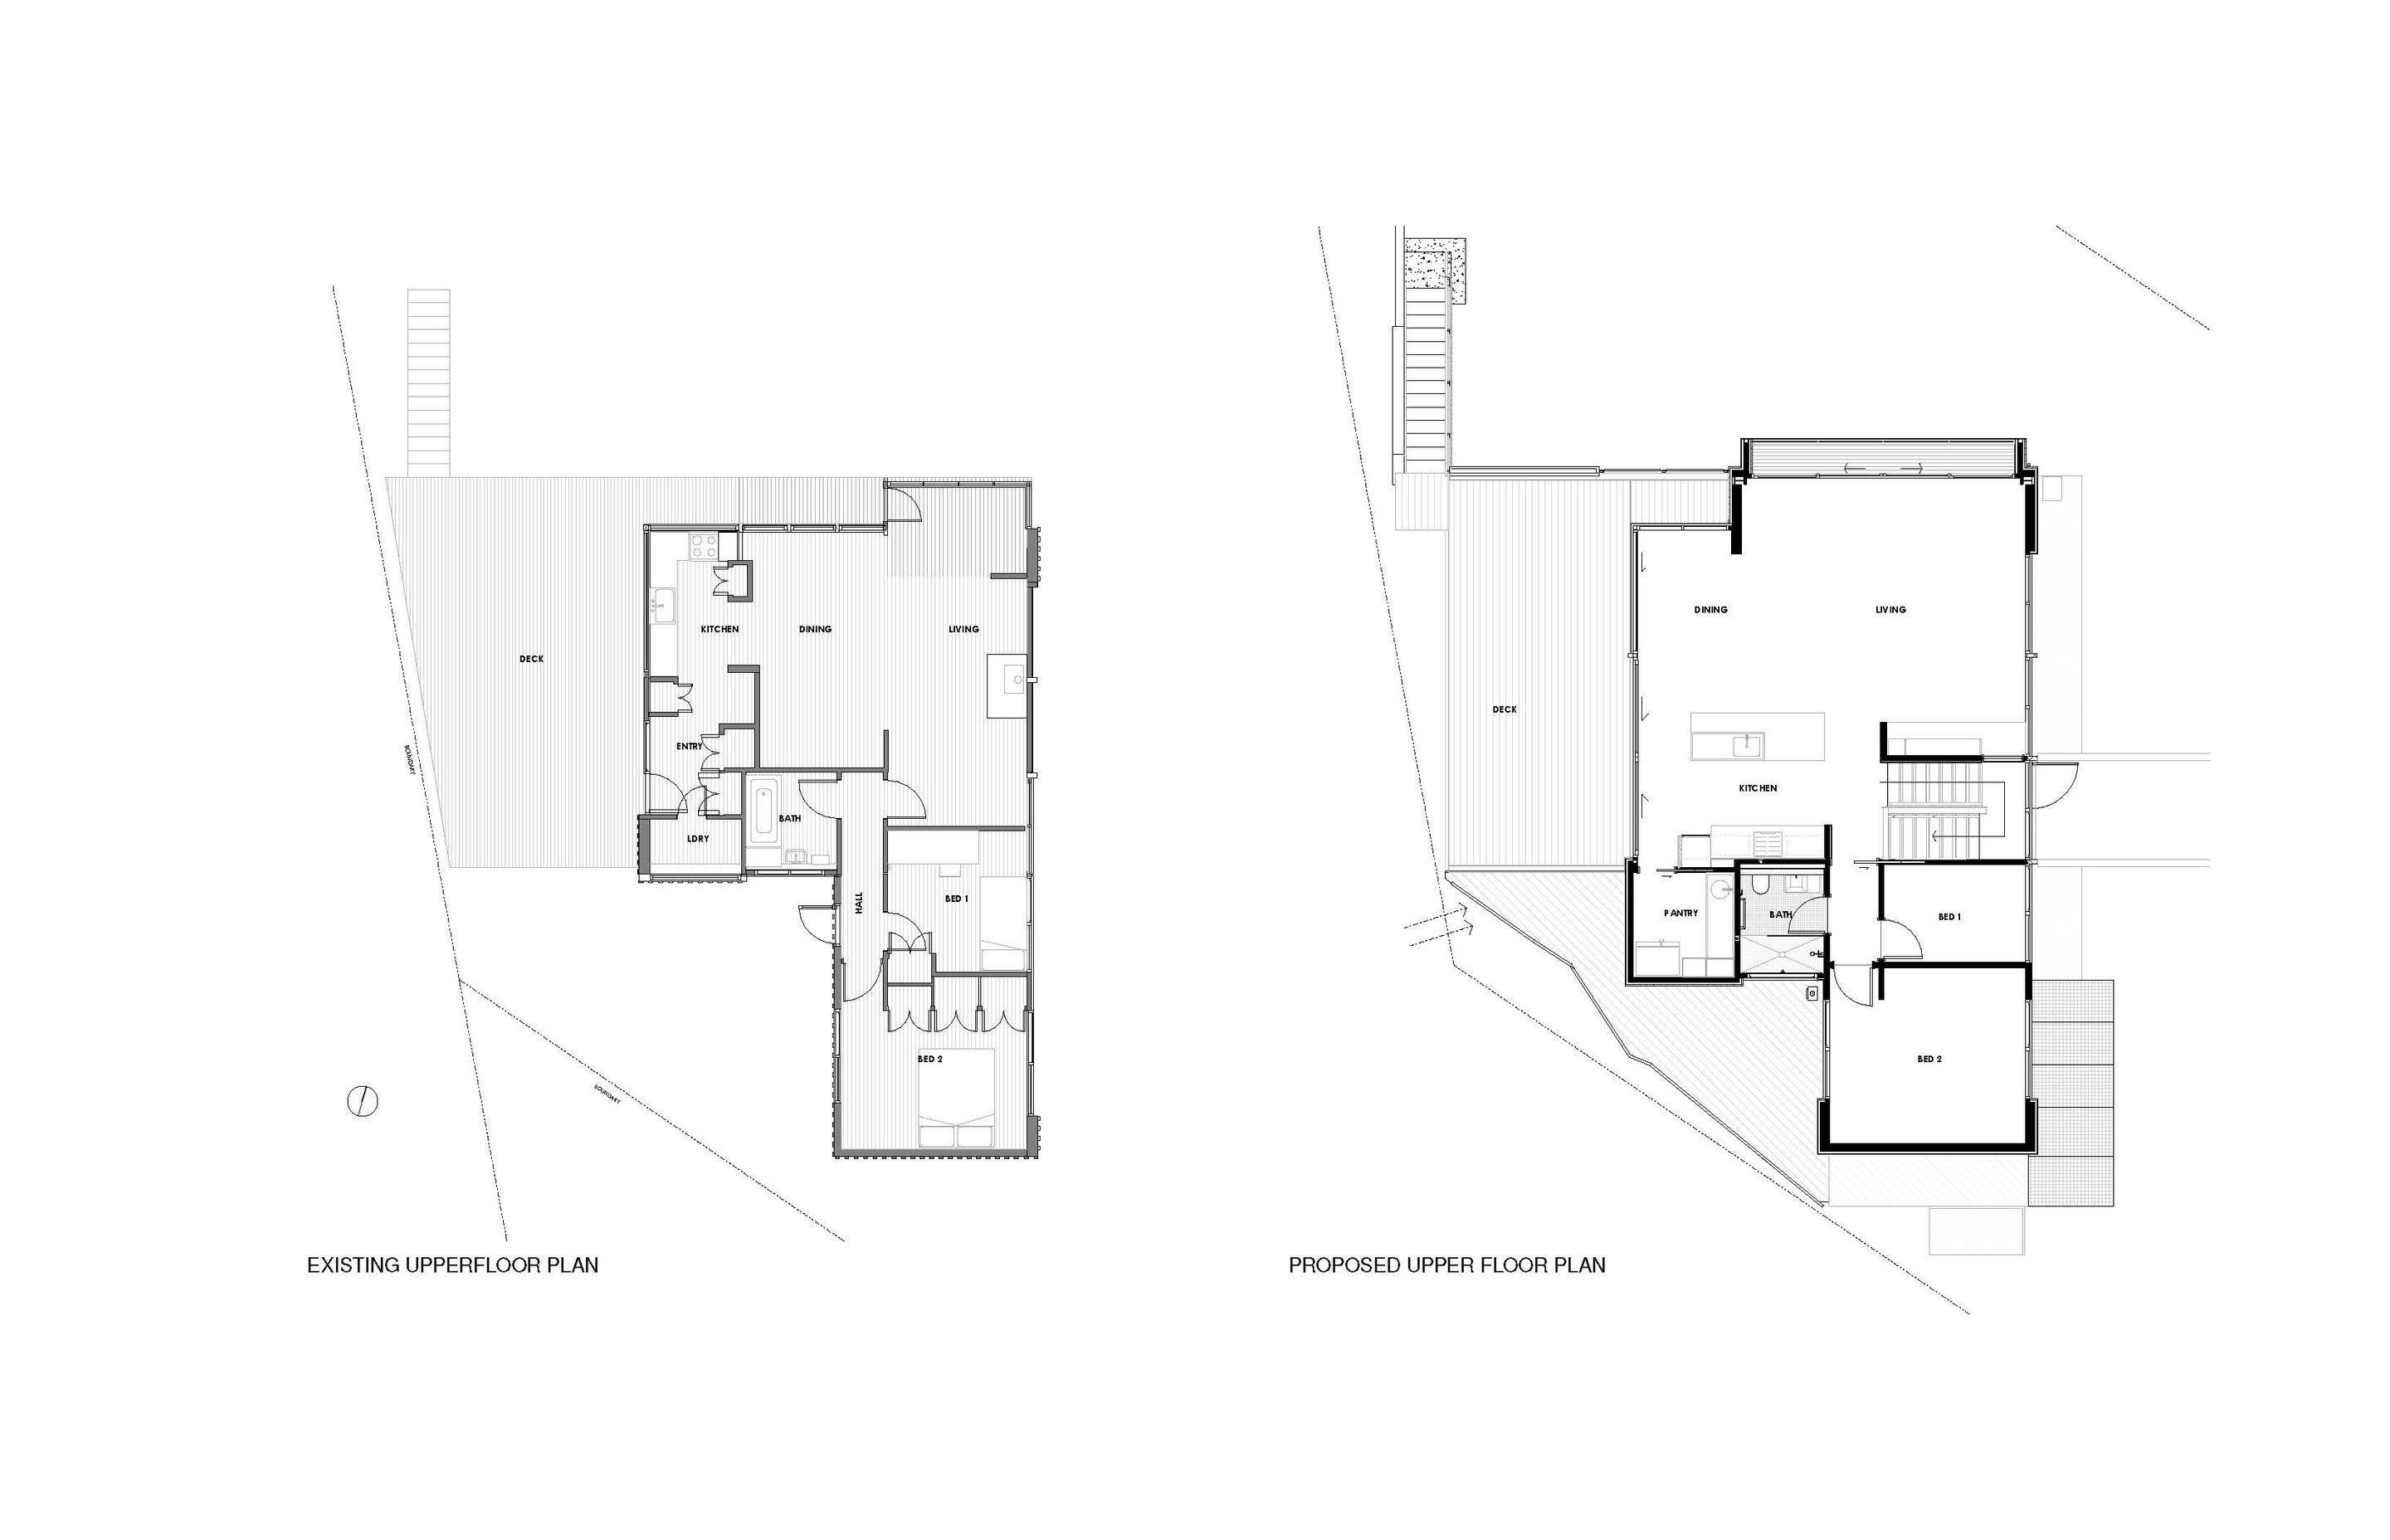 Floorplan showing pre-earthquake layout on the left and post-earthquake layout on the right, with the addition of the internal staircase and repositioned entry.